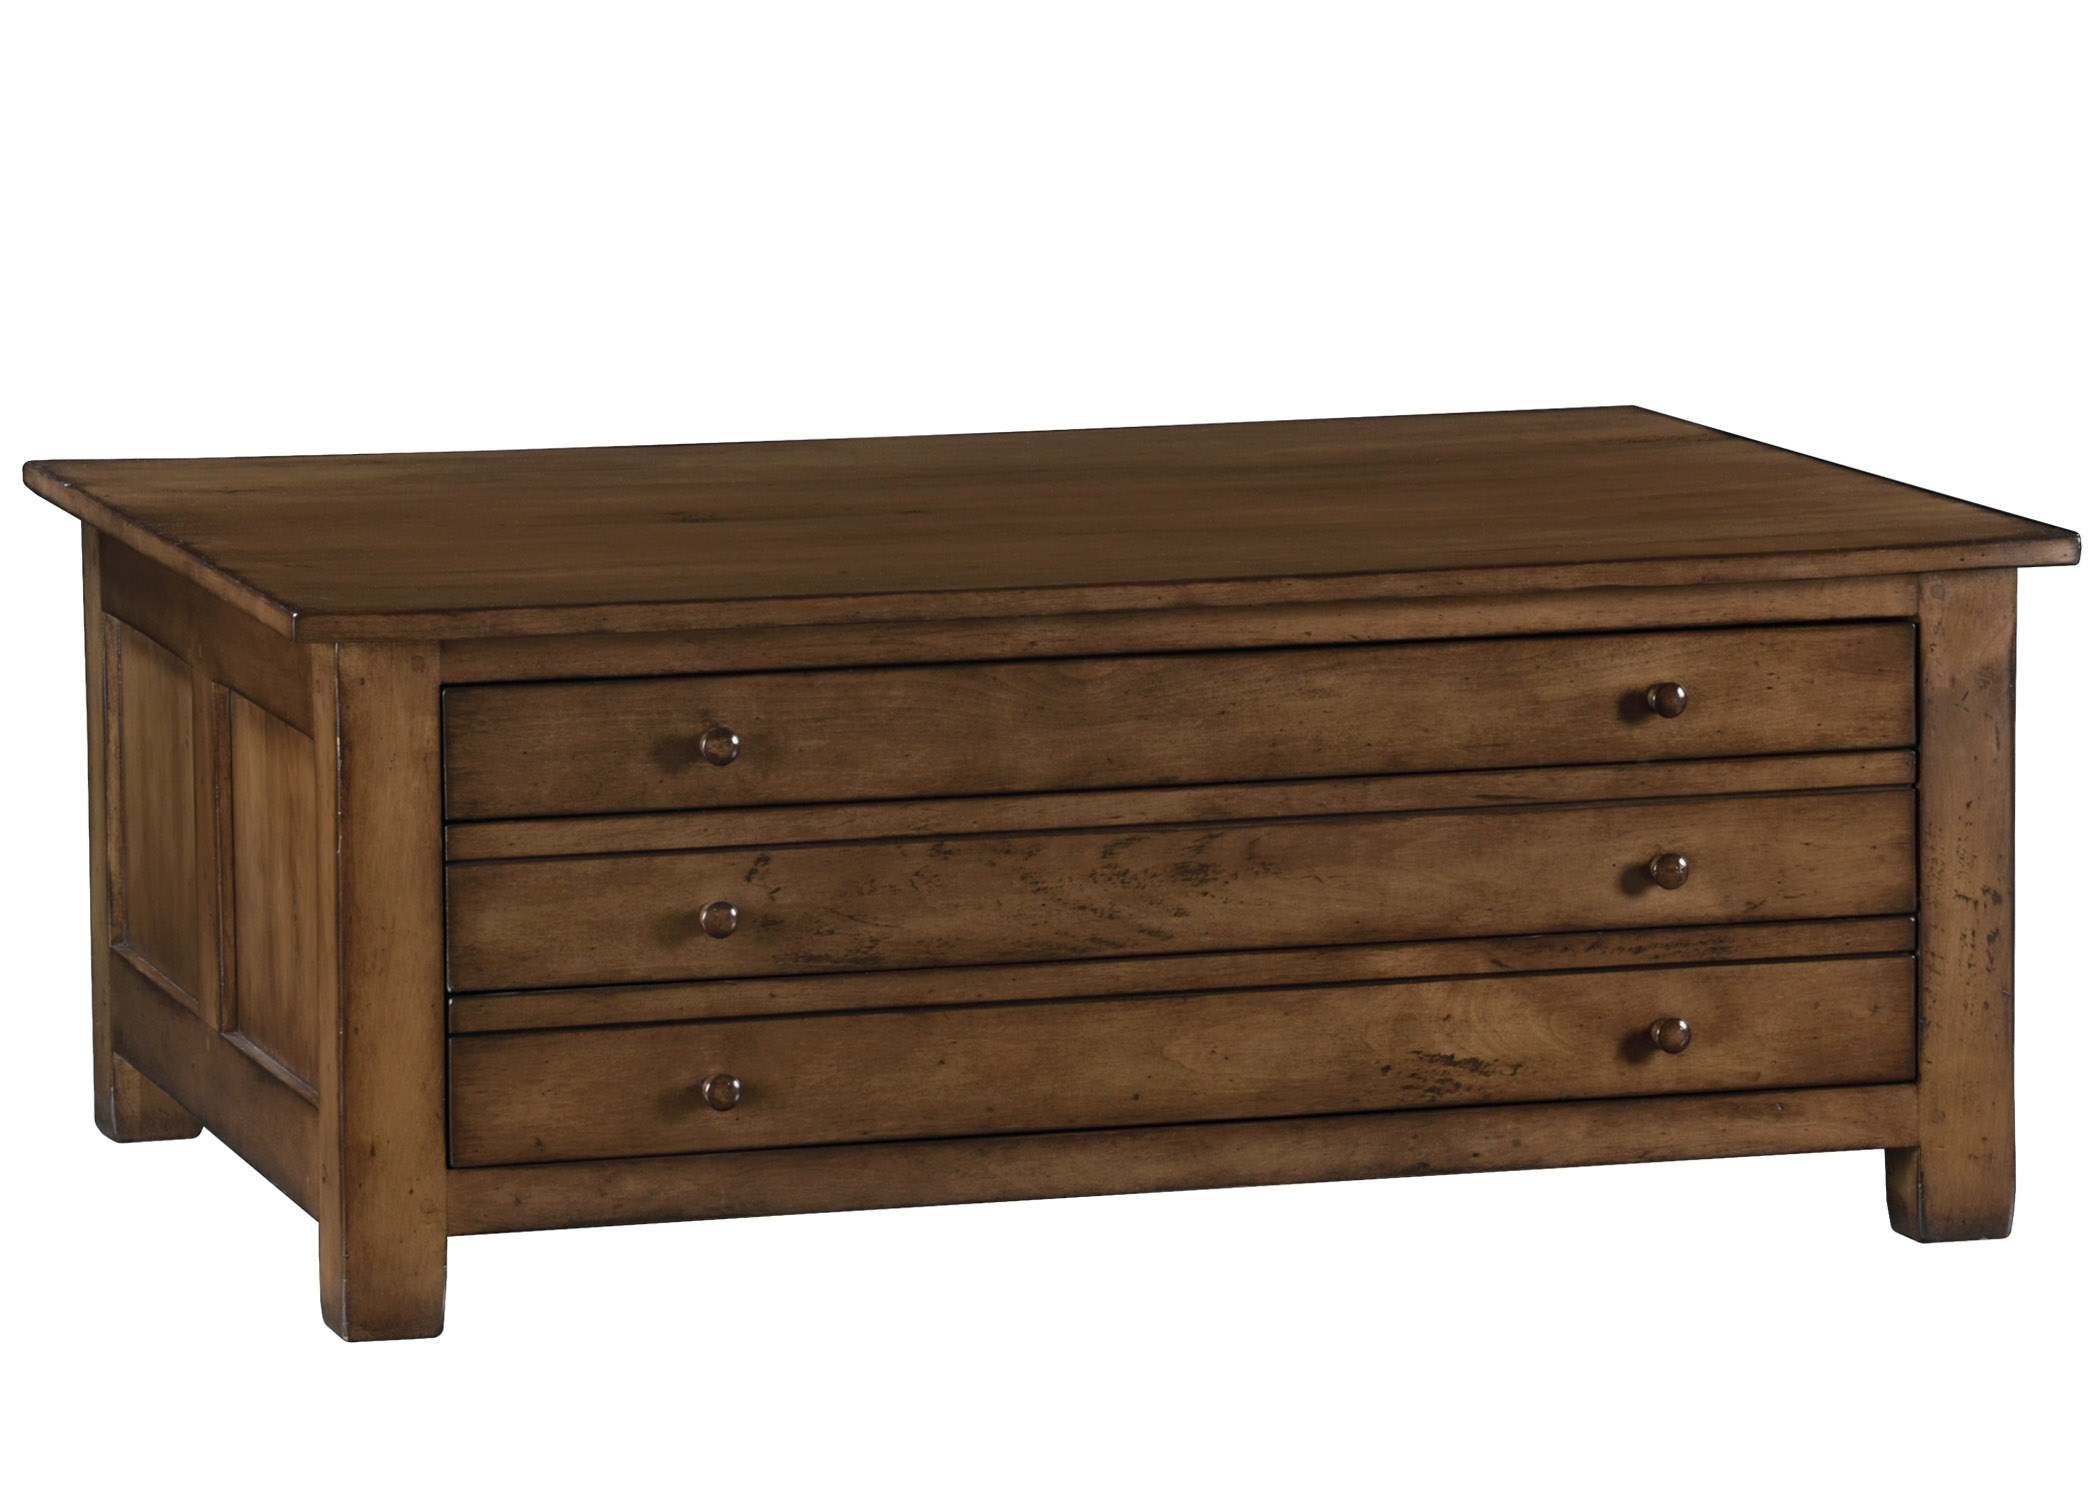 Map traditional transitional coffee cocktail table with drawers by Woodland furniture in Idaho Falls USA